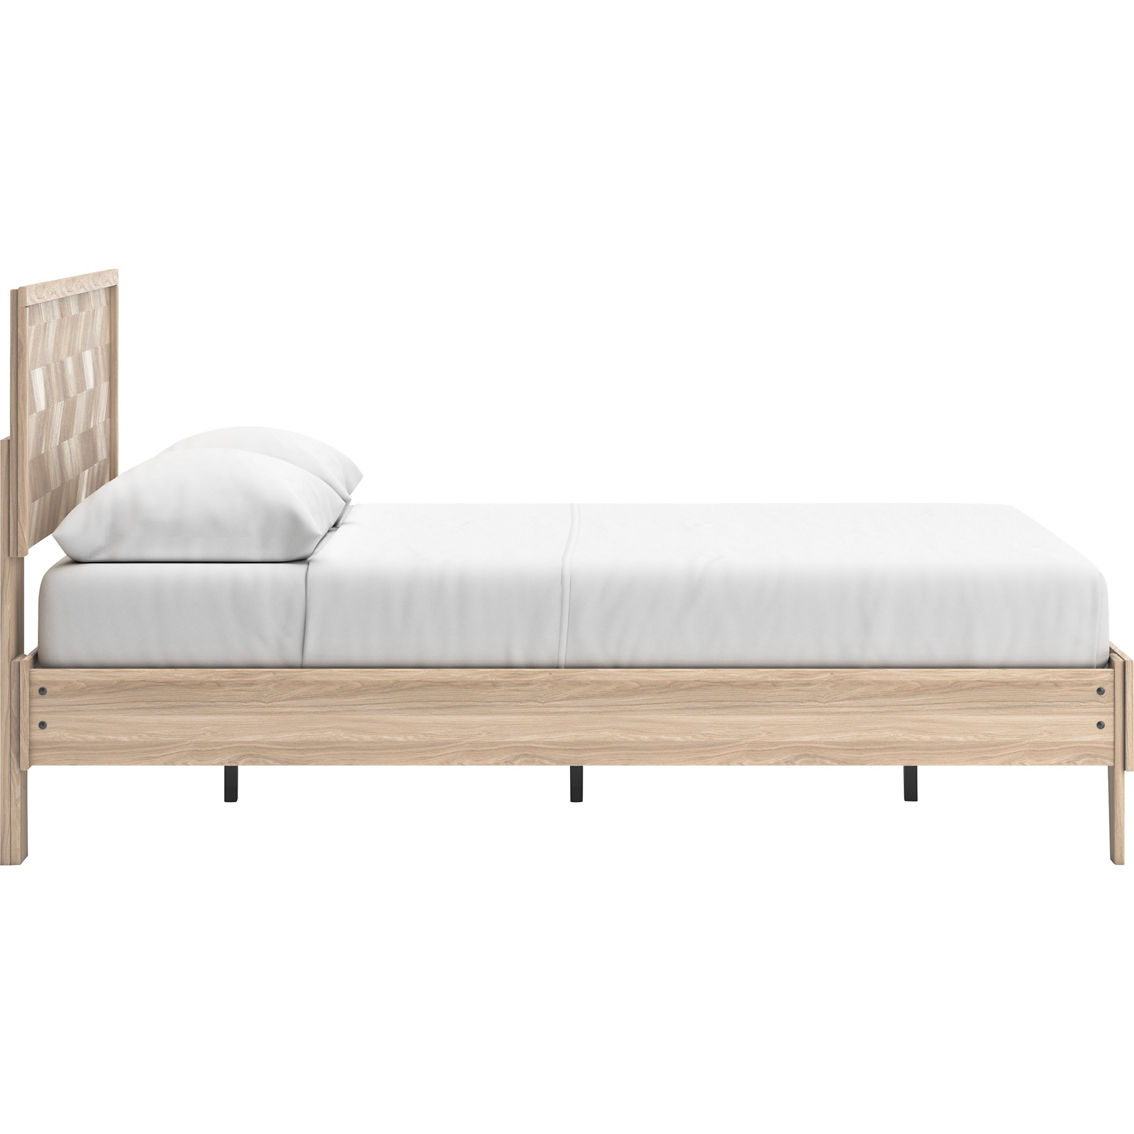 Signature Design by Ashley Battelle Ready-to-Assemble Panel Bed - Image 6 of 7